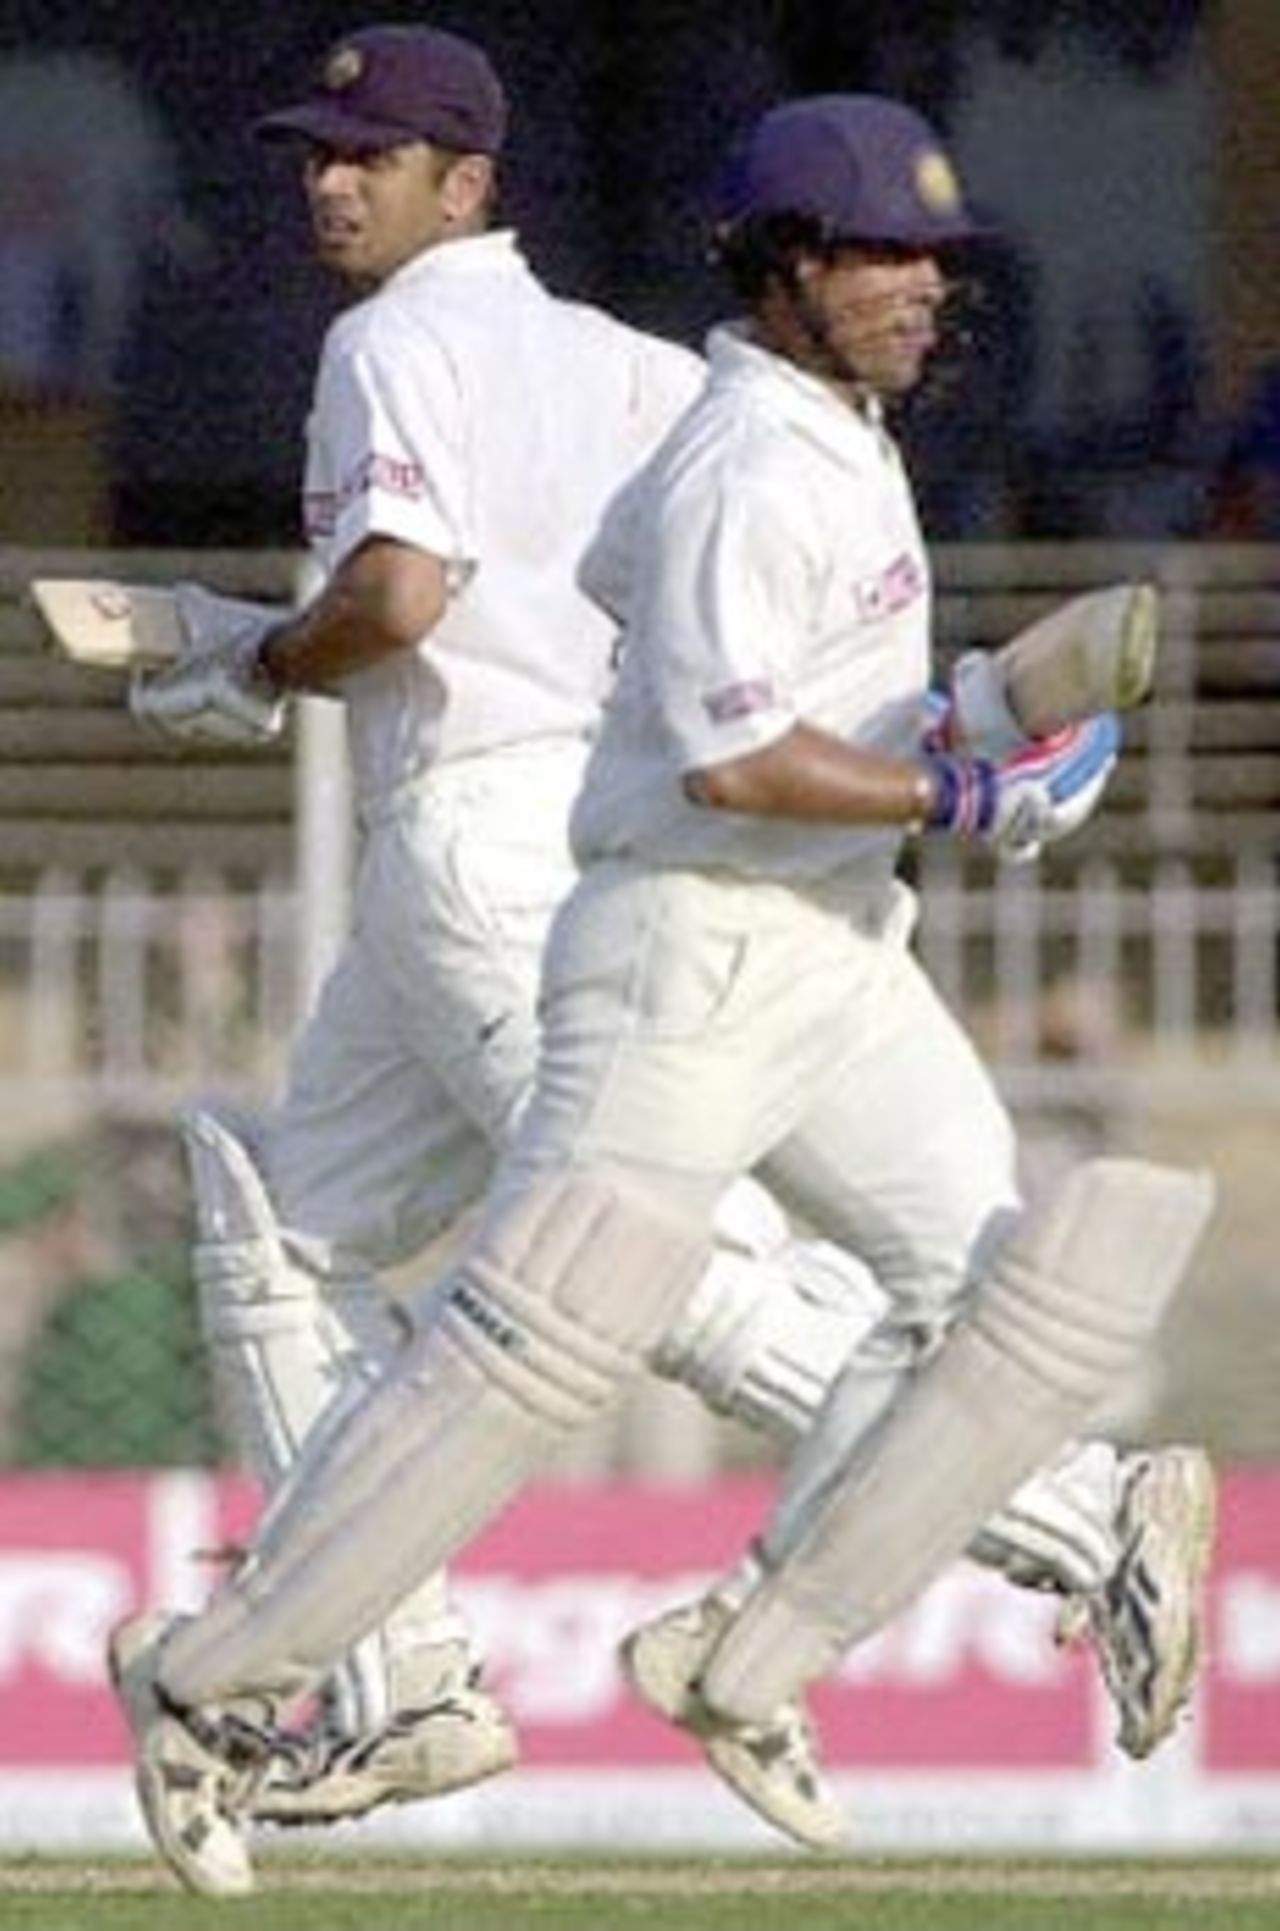 Indian batsmen Rahul Dravid (L) and Sachin Tendulkar pass each other while adding yet another run to the day's tally during the first day of the second Test cricket match between India and Zimbabwe in Nagpur, 25 November 2000. India made 306 for 2 at close of the first day's play. India leads Zimbabwe 1-0 in the two Test series.